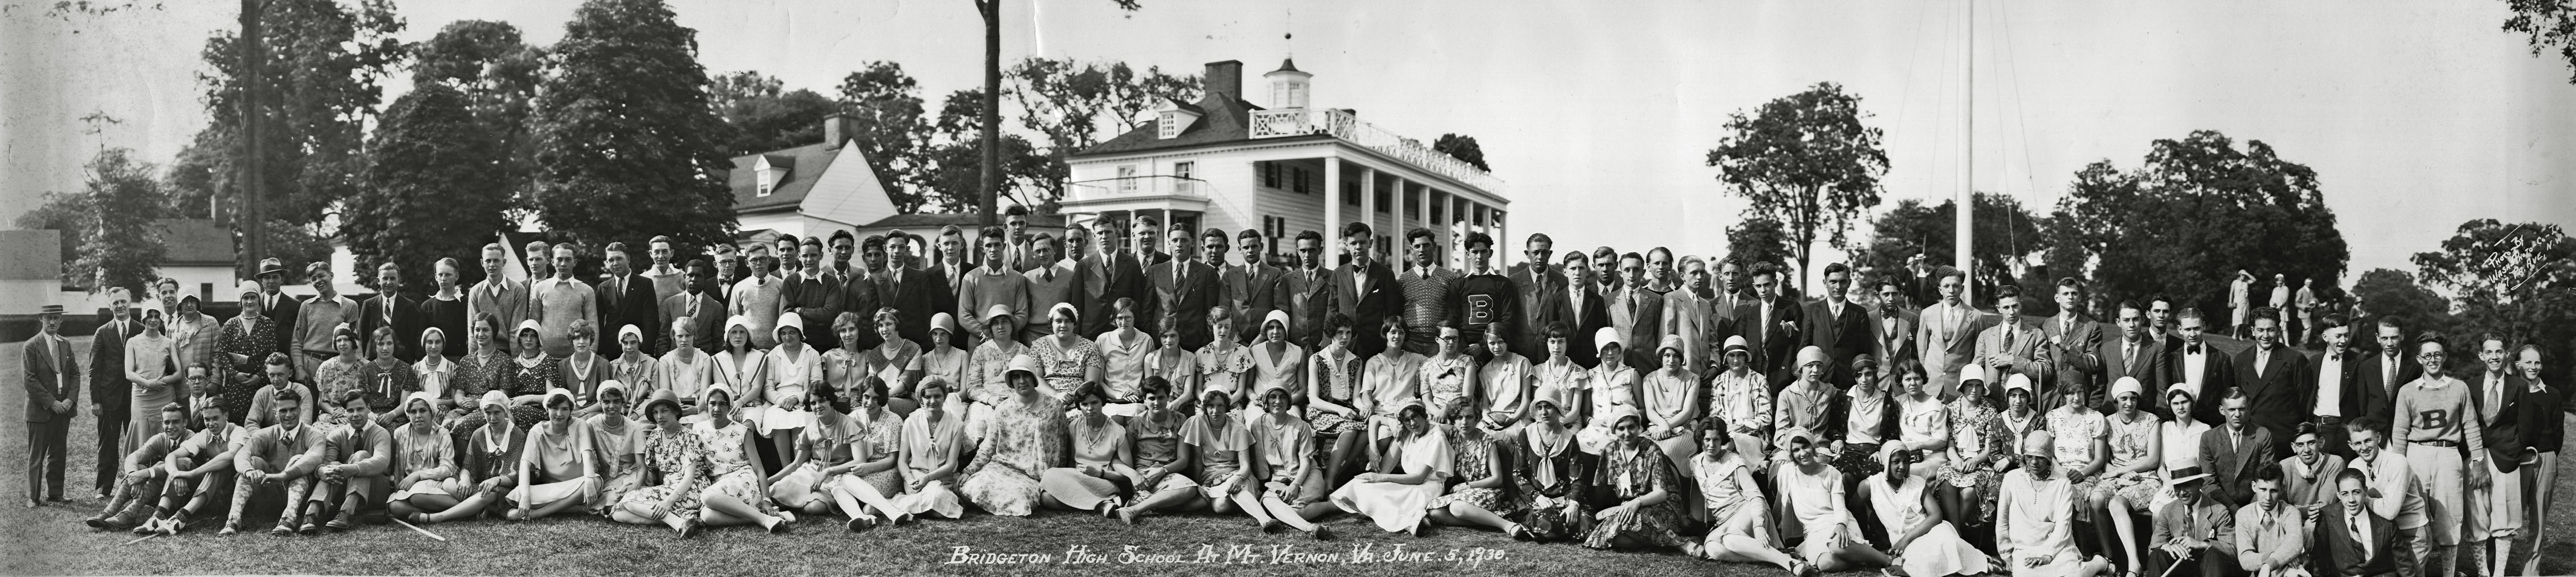 Shorpy Historical Picture Archive :: Mount Vernon with Class: 1930 high ...